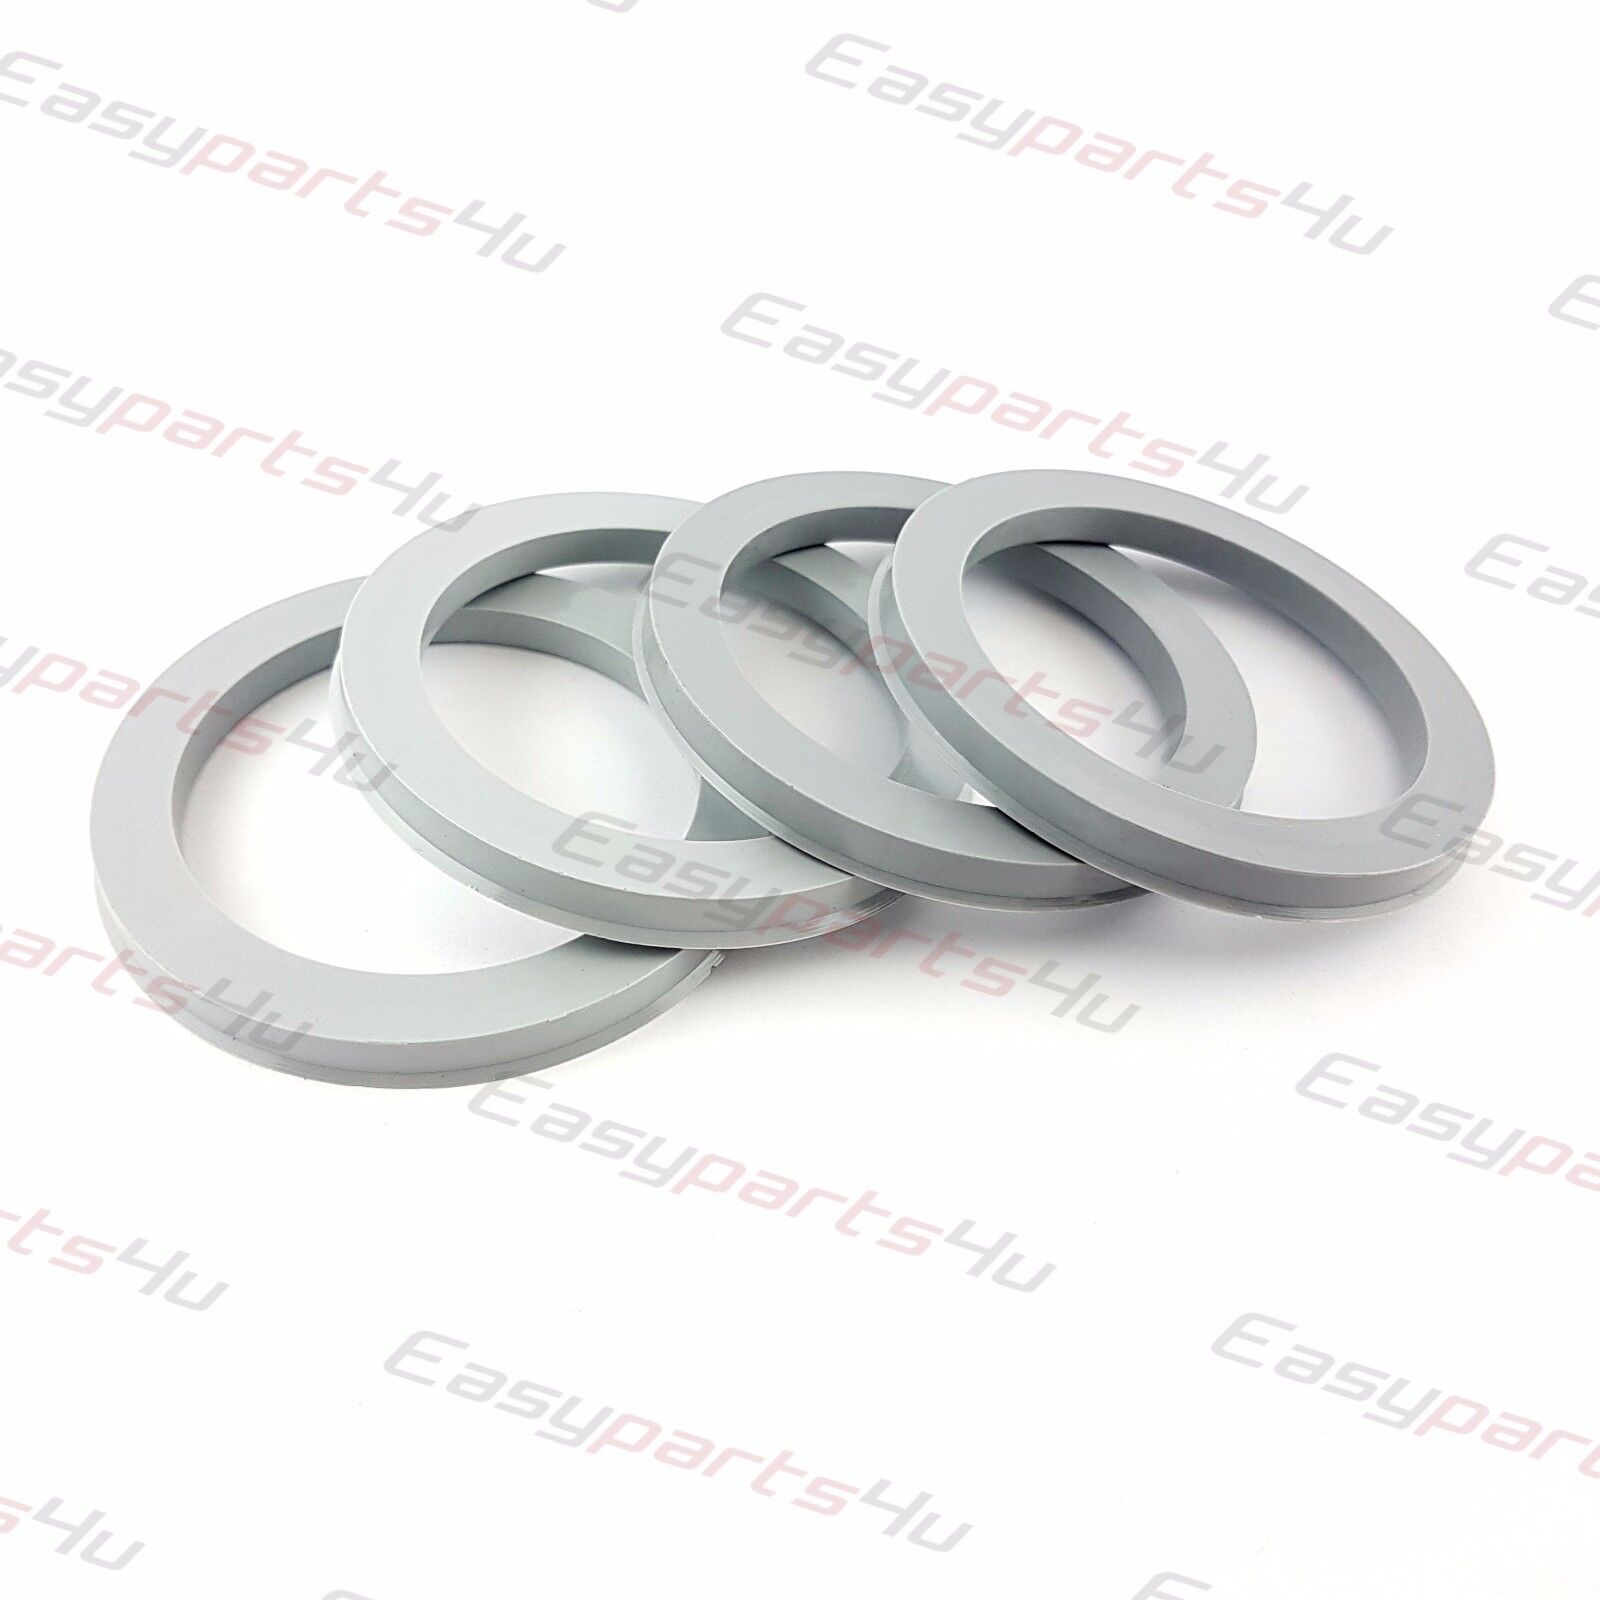 4x spigot rings Discount is also underway 72 6 mm 1 Ranking TOP7 56 wheel for alloy -